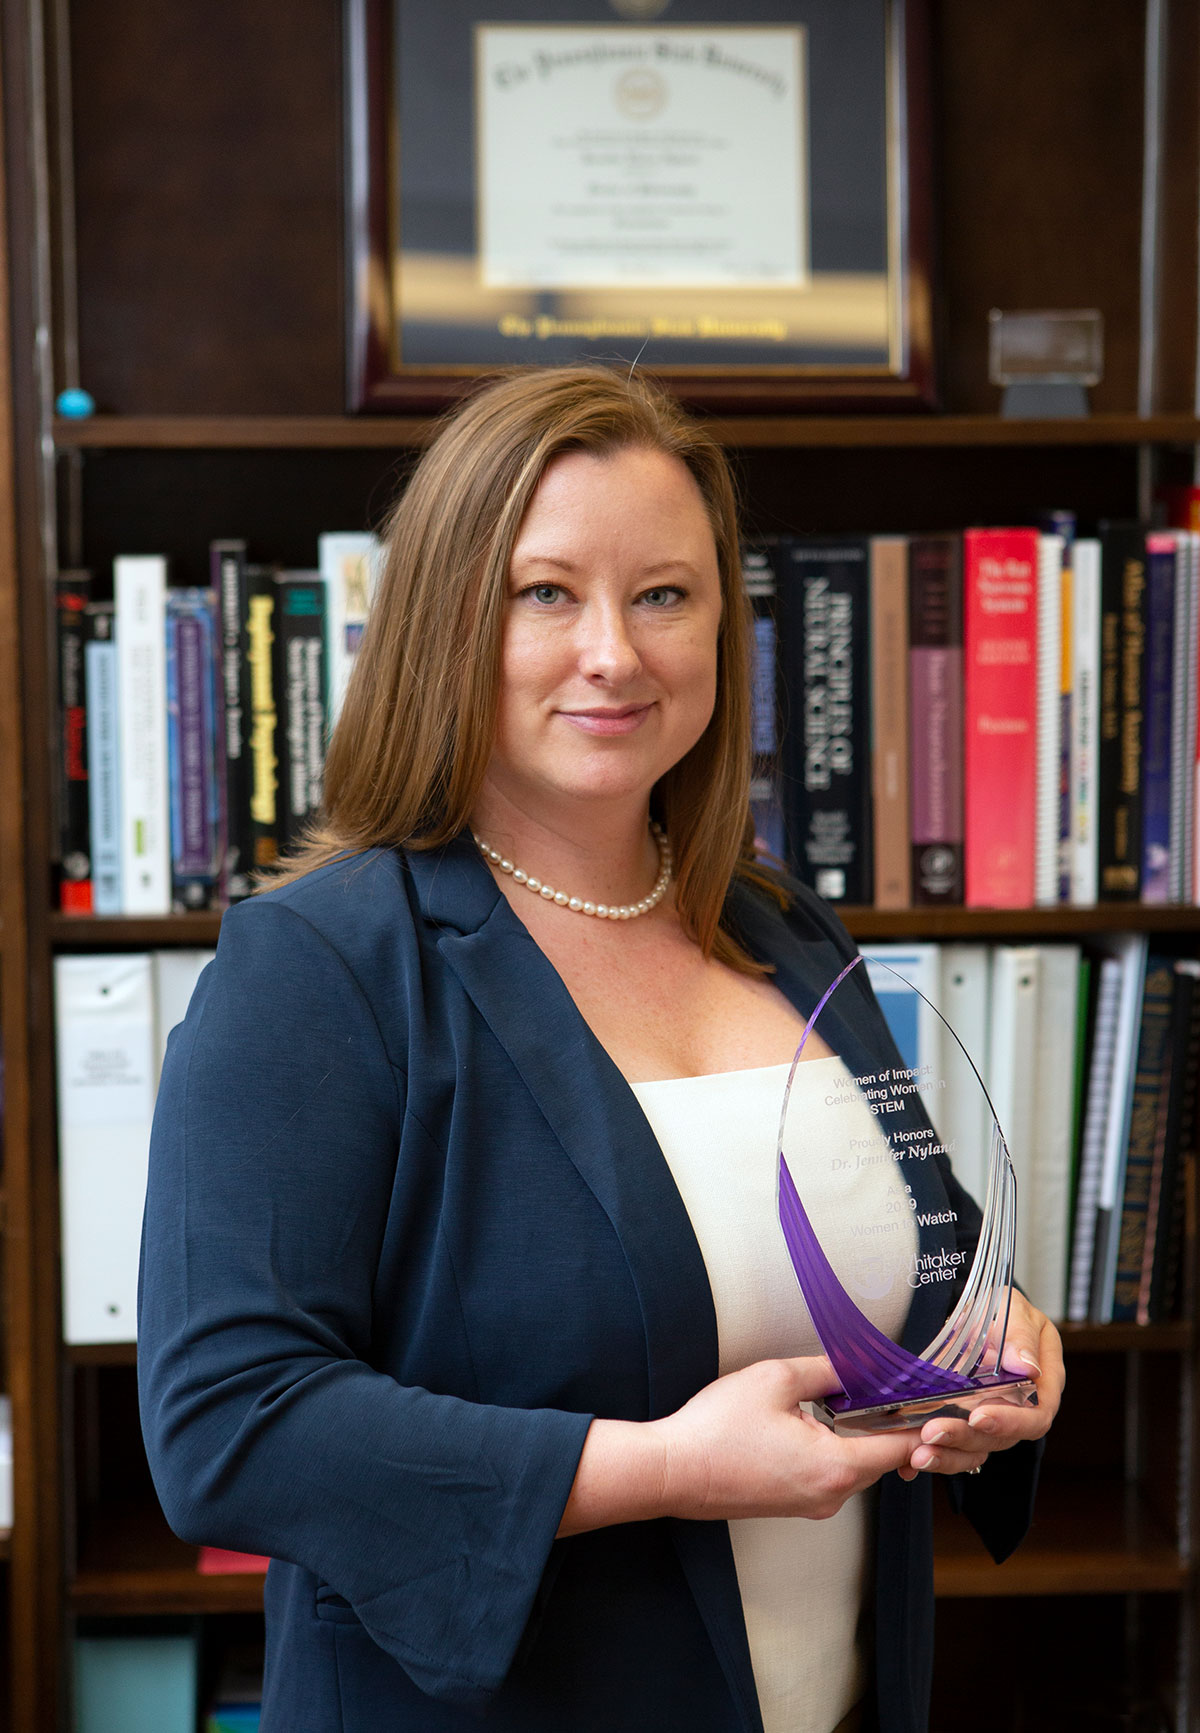 A professional photo of Jennifer Nyland, PhD, shows her holding an award as a Woman to Watch in STEM. She is standing in her office with books and a framed degree in the background.